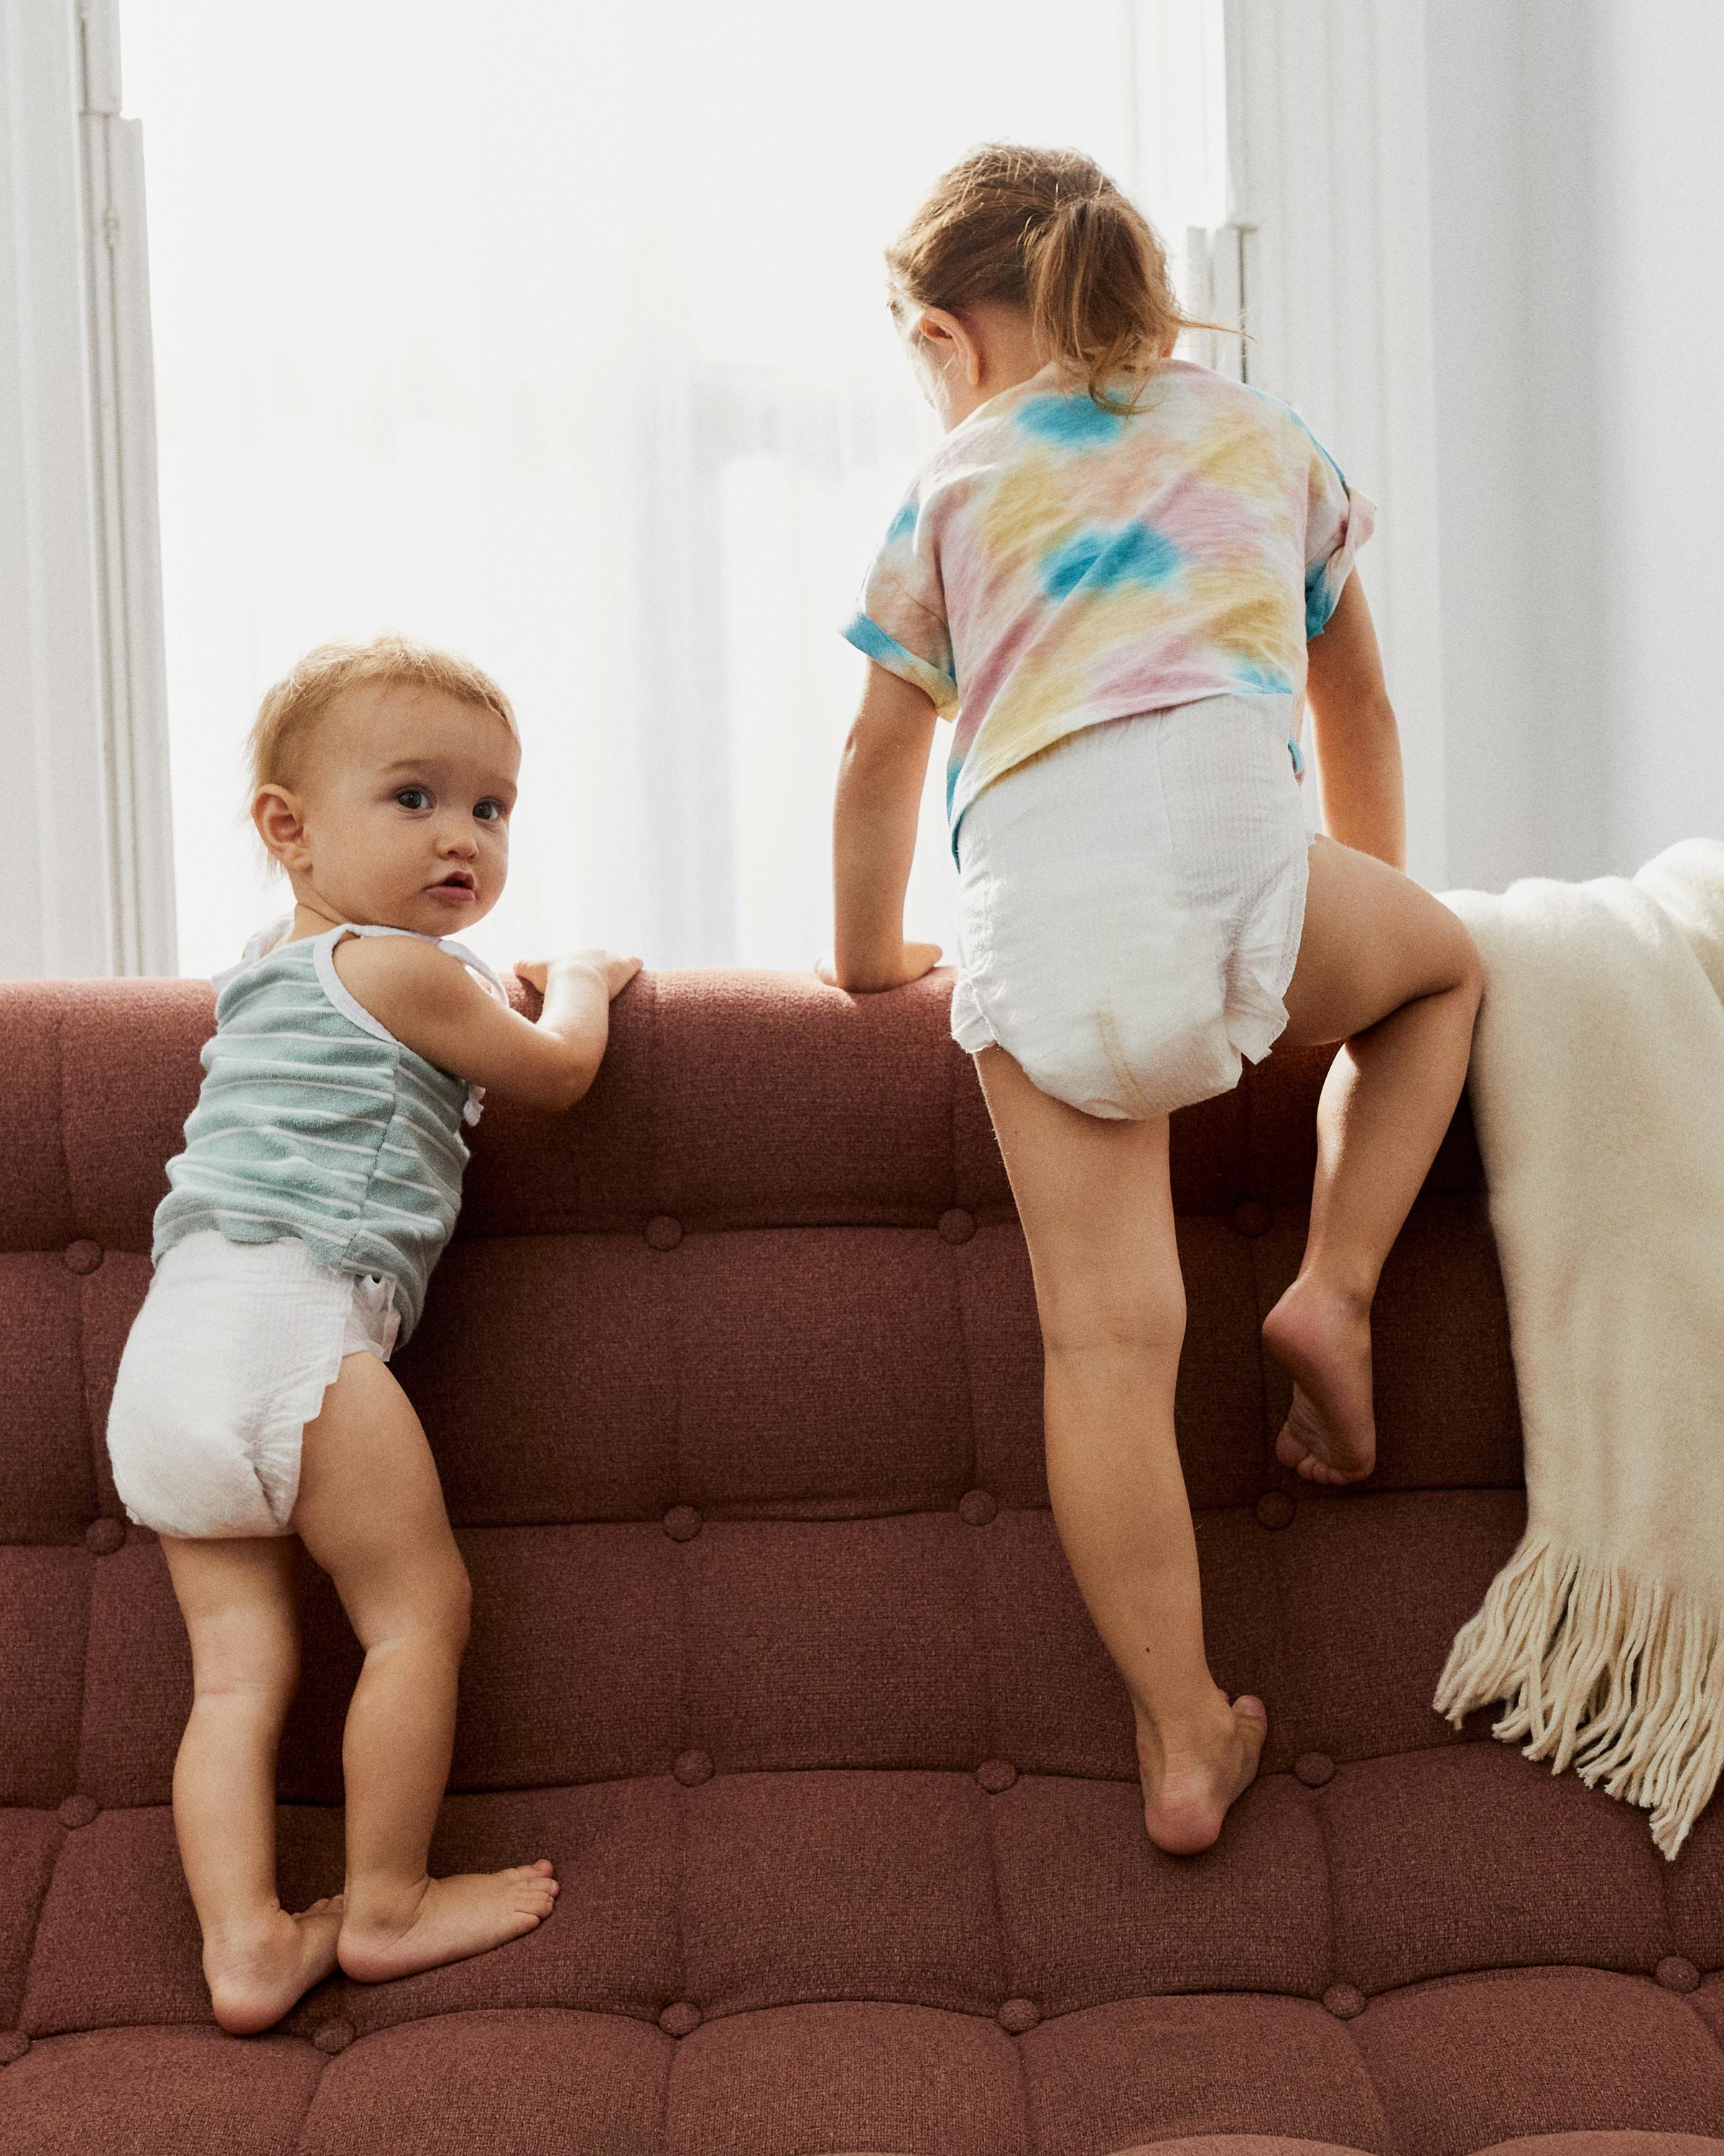 two children are climbing on the base of a couch.